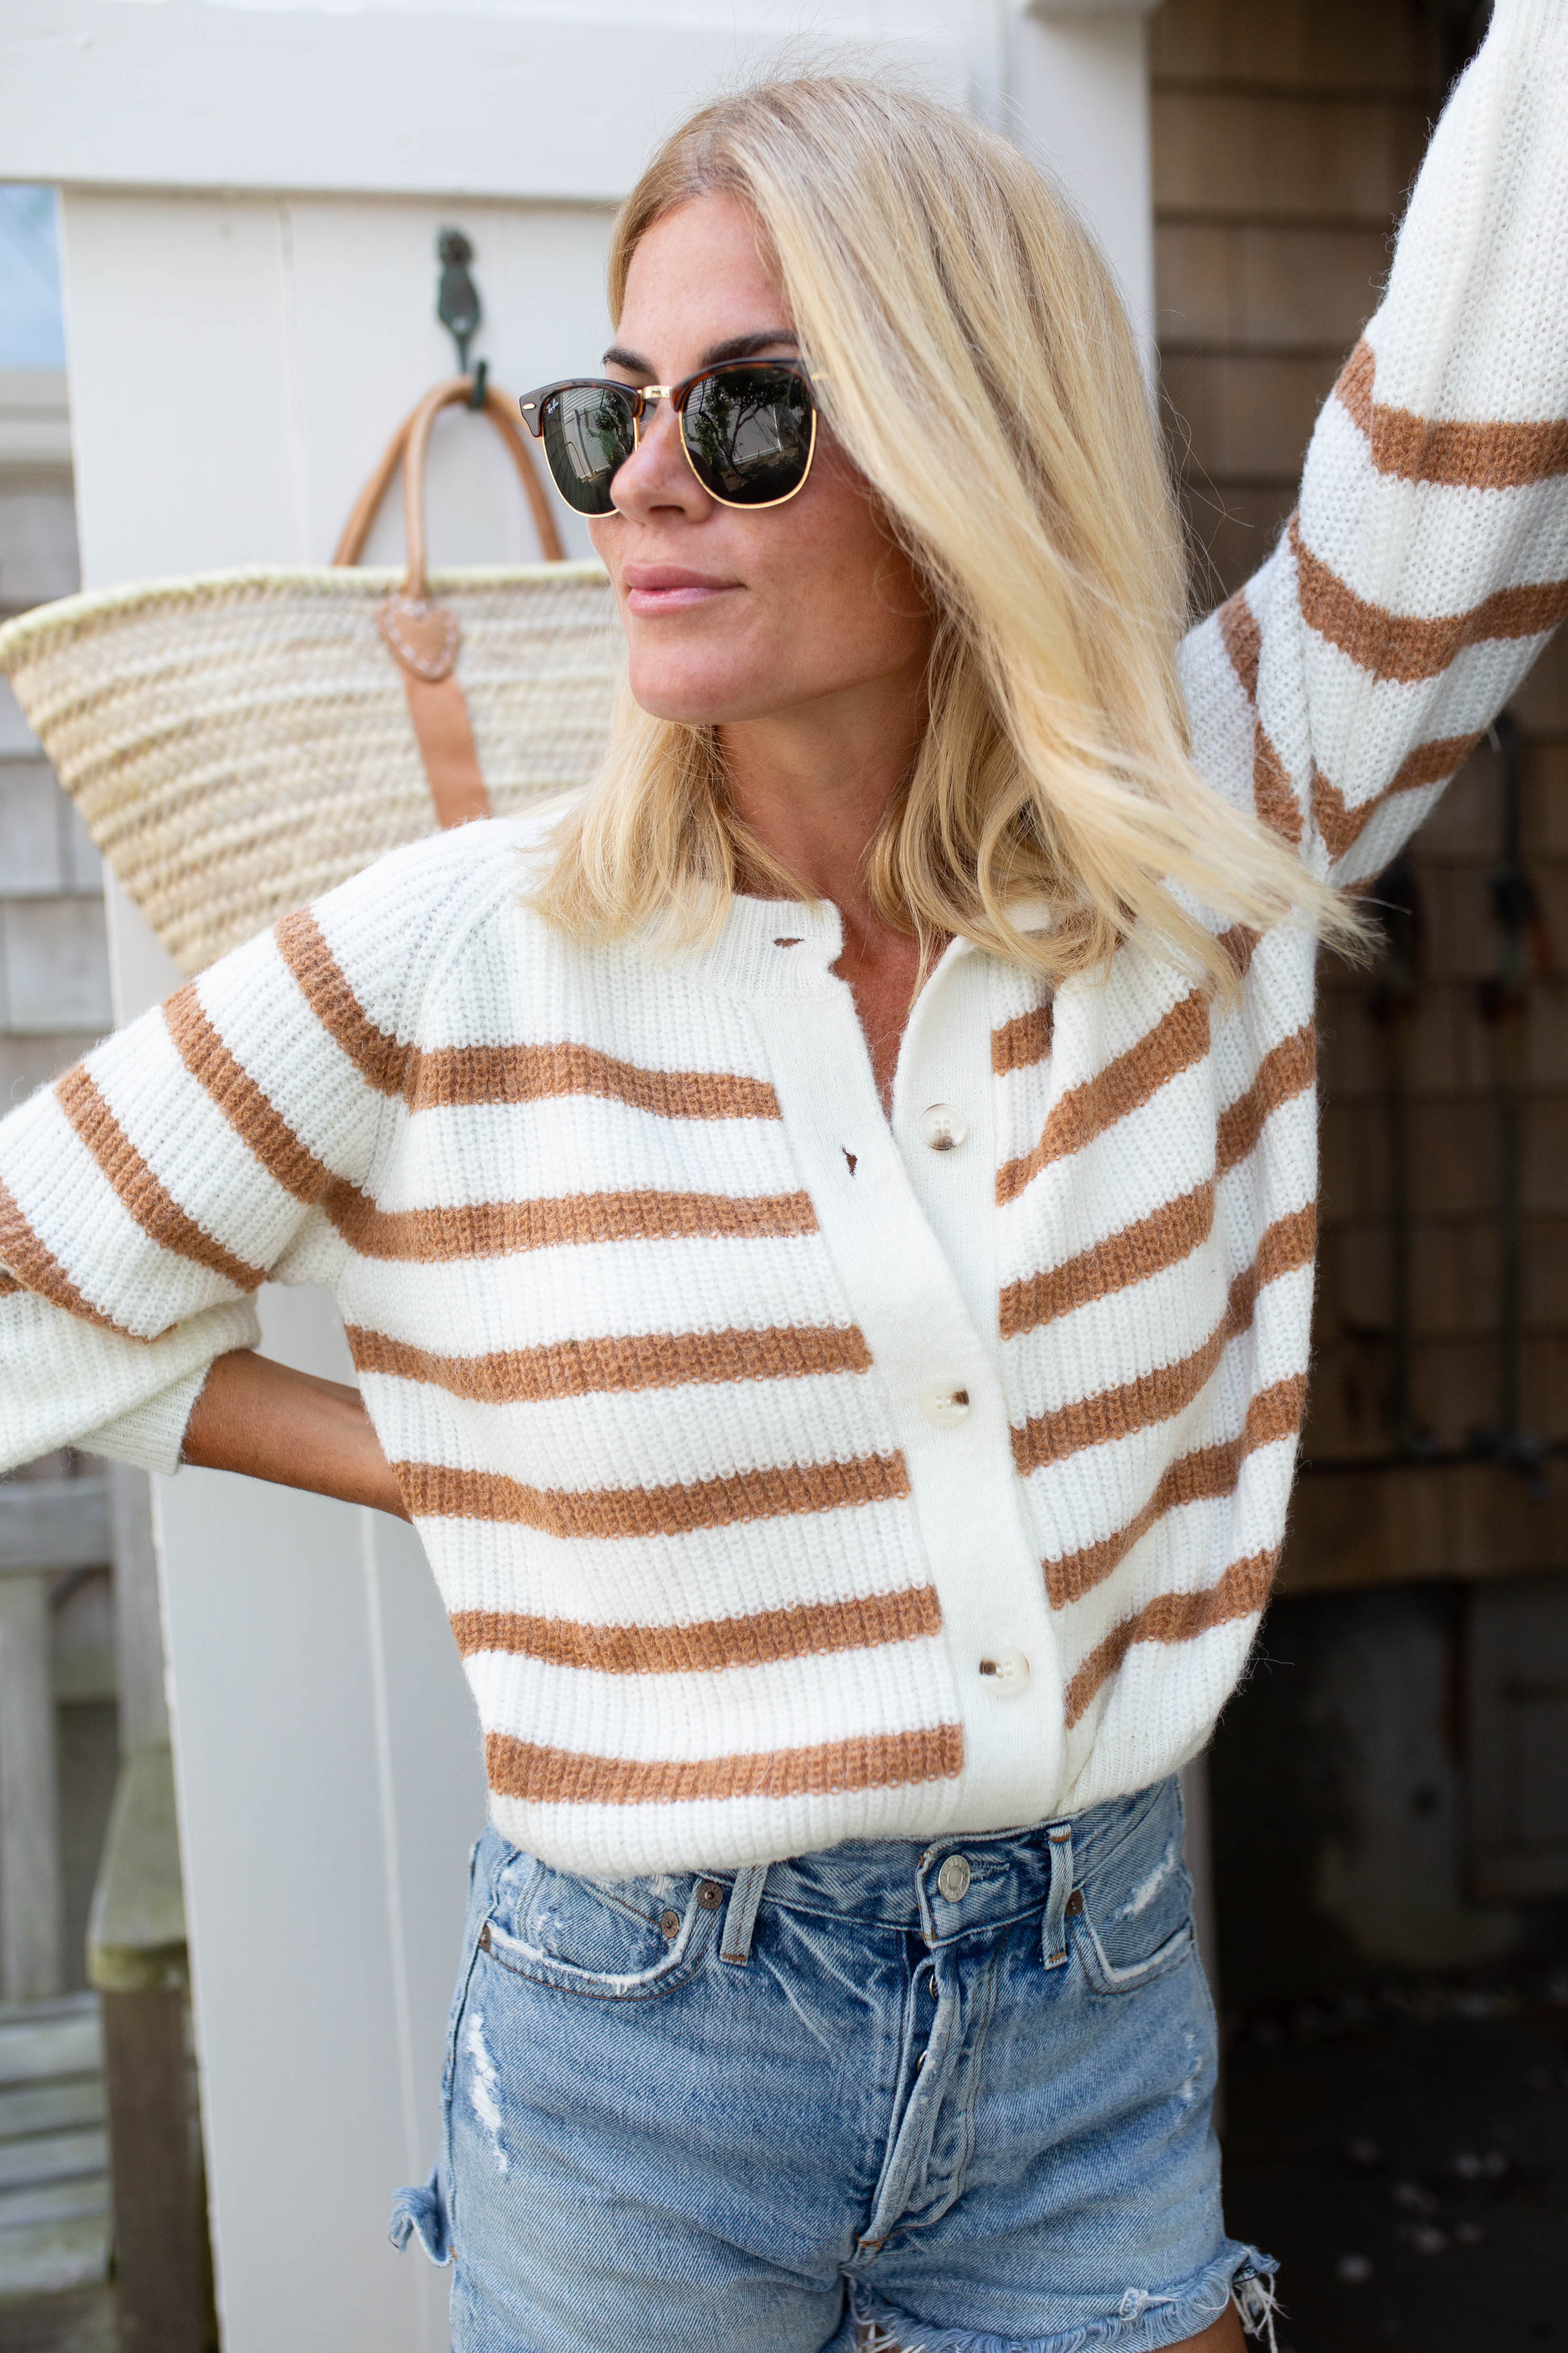 Classic Cable Knit Cardigan in Flax - Marea by Liz Joy – Townsend Provisions